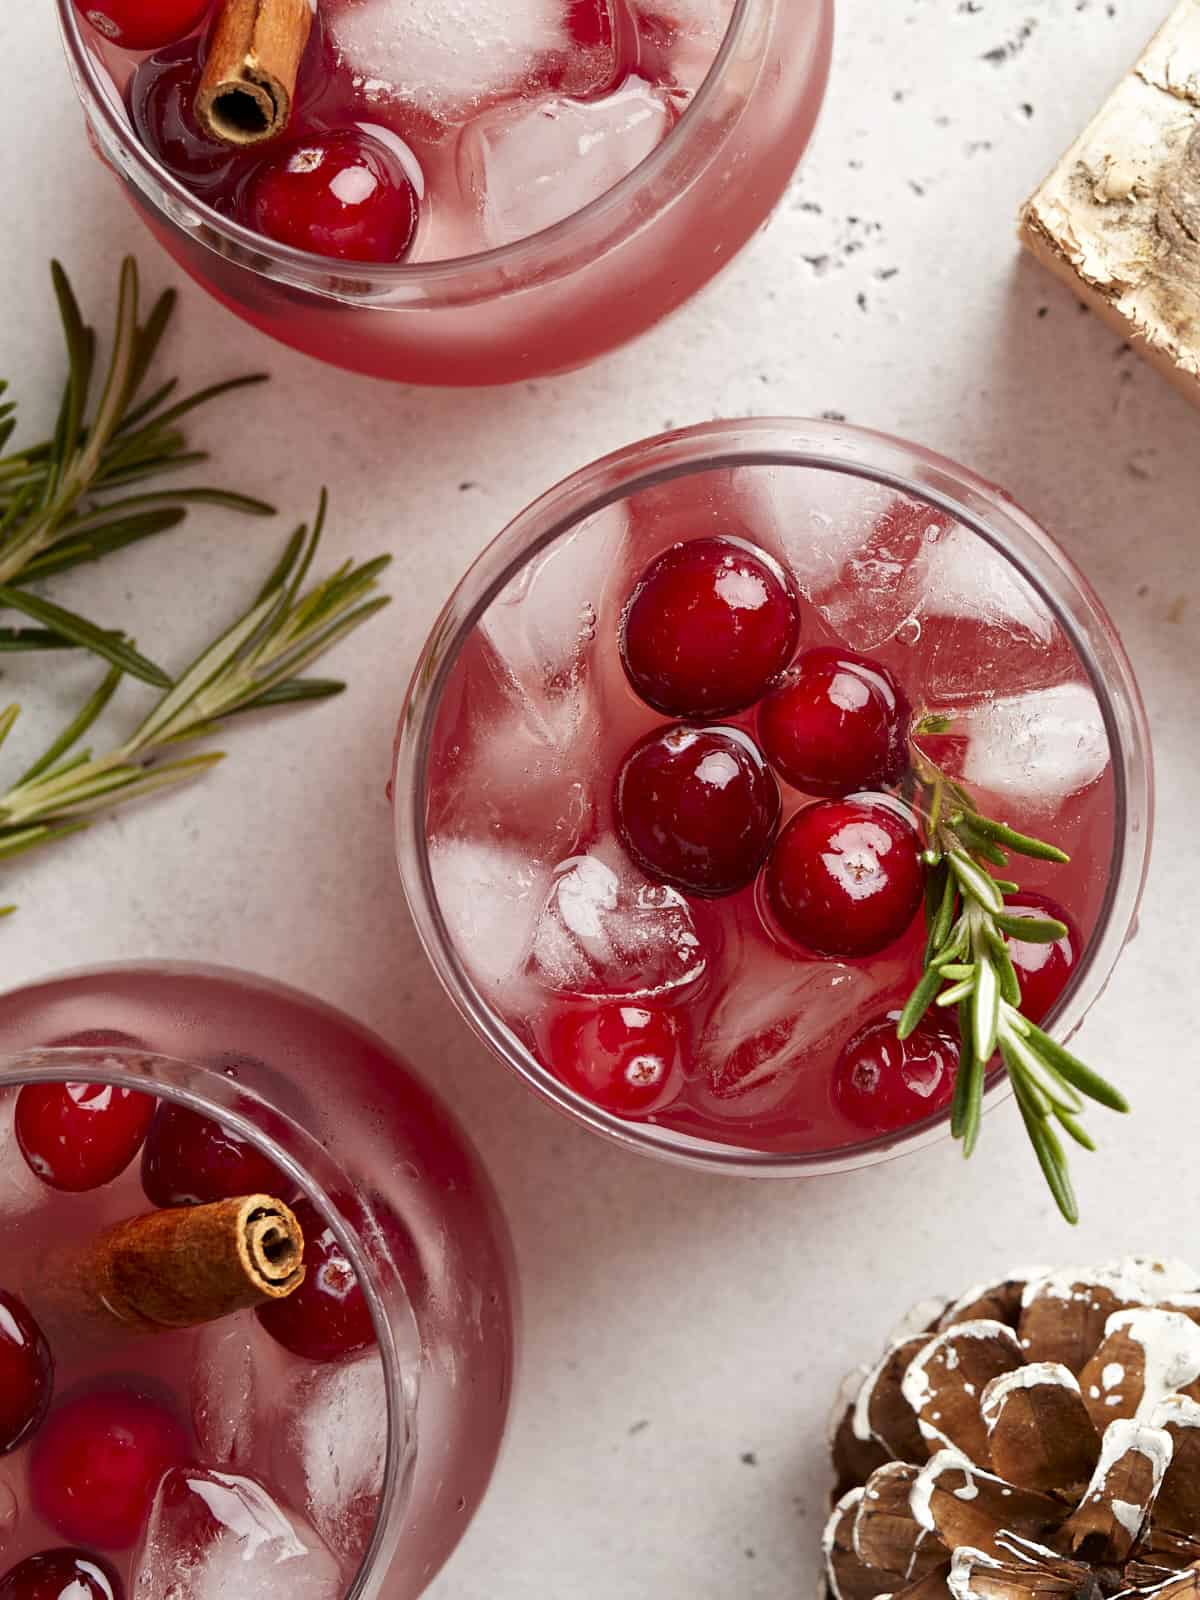 Overhead view of three glasses of Christmas punch garnished with cranberries and fresh rosemary.